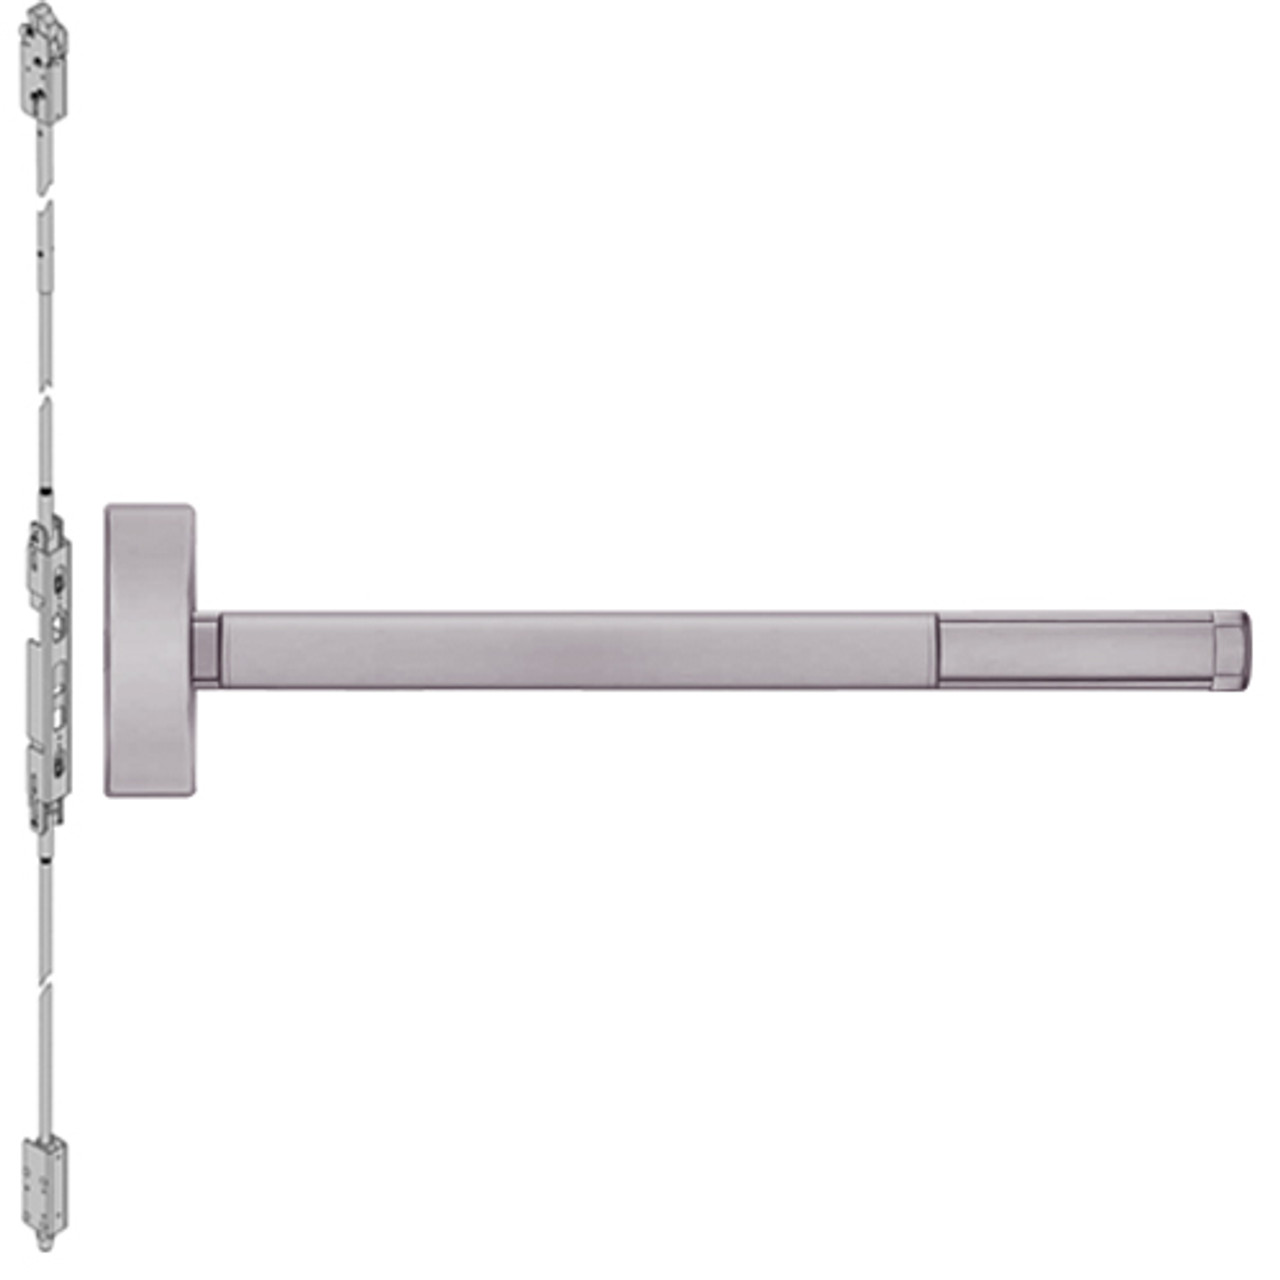 DEFL2803LBR-630-48 PHI 2800 Series Fire Rated Concealed Vertical Rod Exit Device with Delayed Egress Prepped for Key Retracts Latchbolt in Satin Stainless Steel Finish